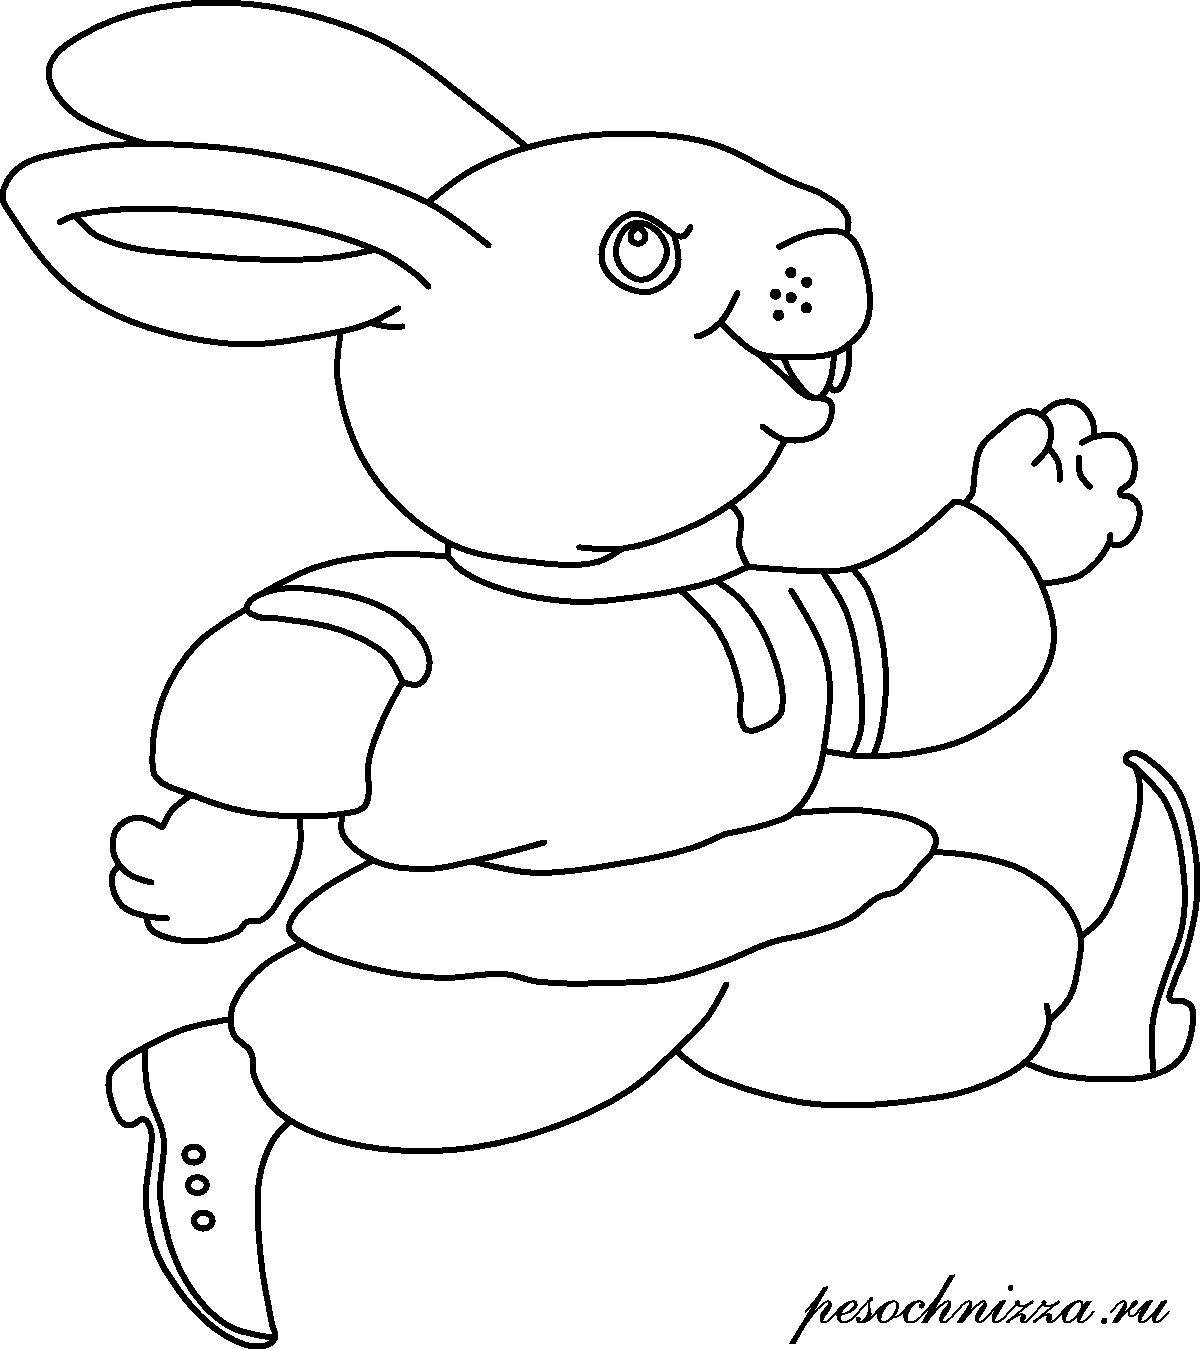 Exquisite hare coloring book for 3-4 year olds